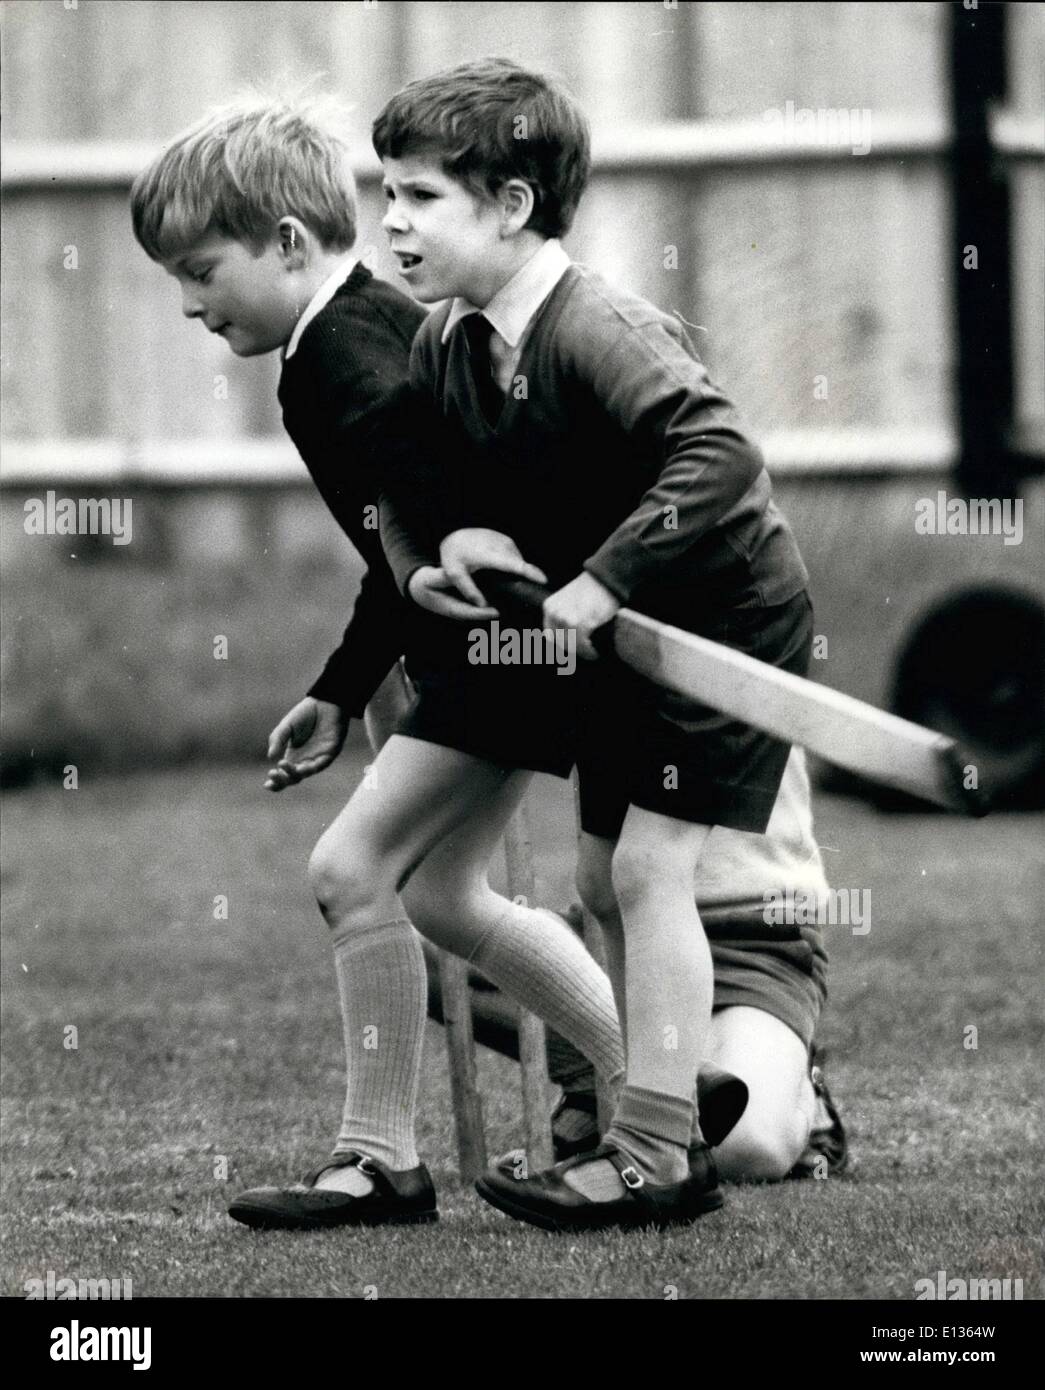 Feb. 28, 2012 - Some slightly unroyal behaviour from 7 year old Viscount Linley (right) as he tries to prevent one of his classmates getting the cricket bat. Son of Princess Margaret and Earl of Snowdon. Stock Photo